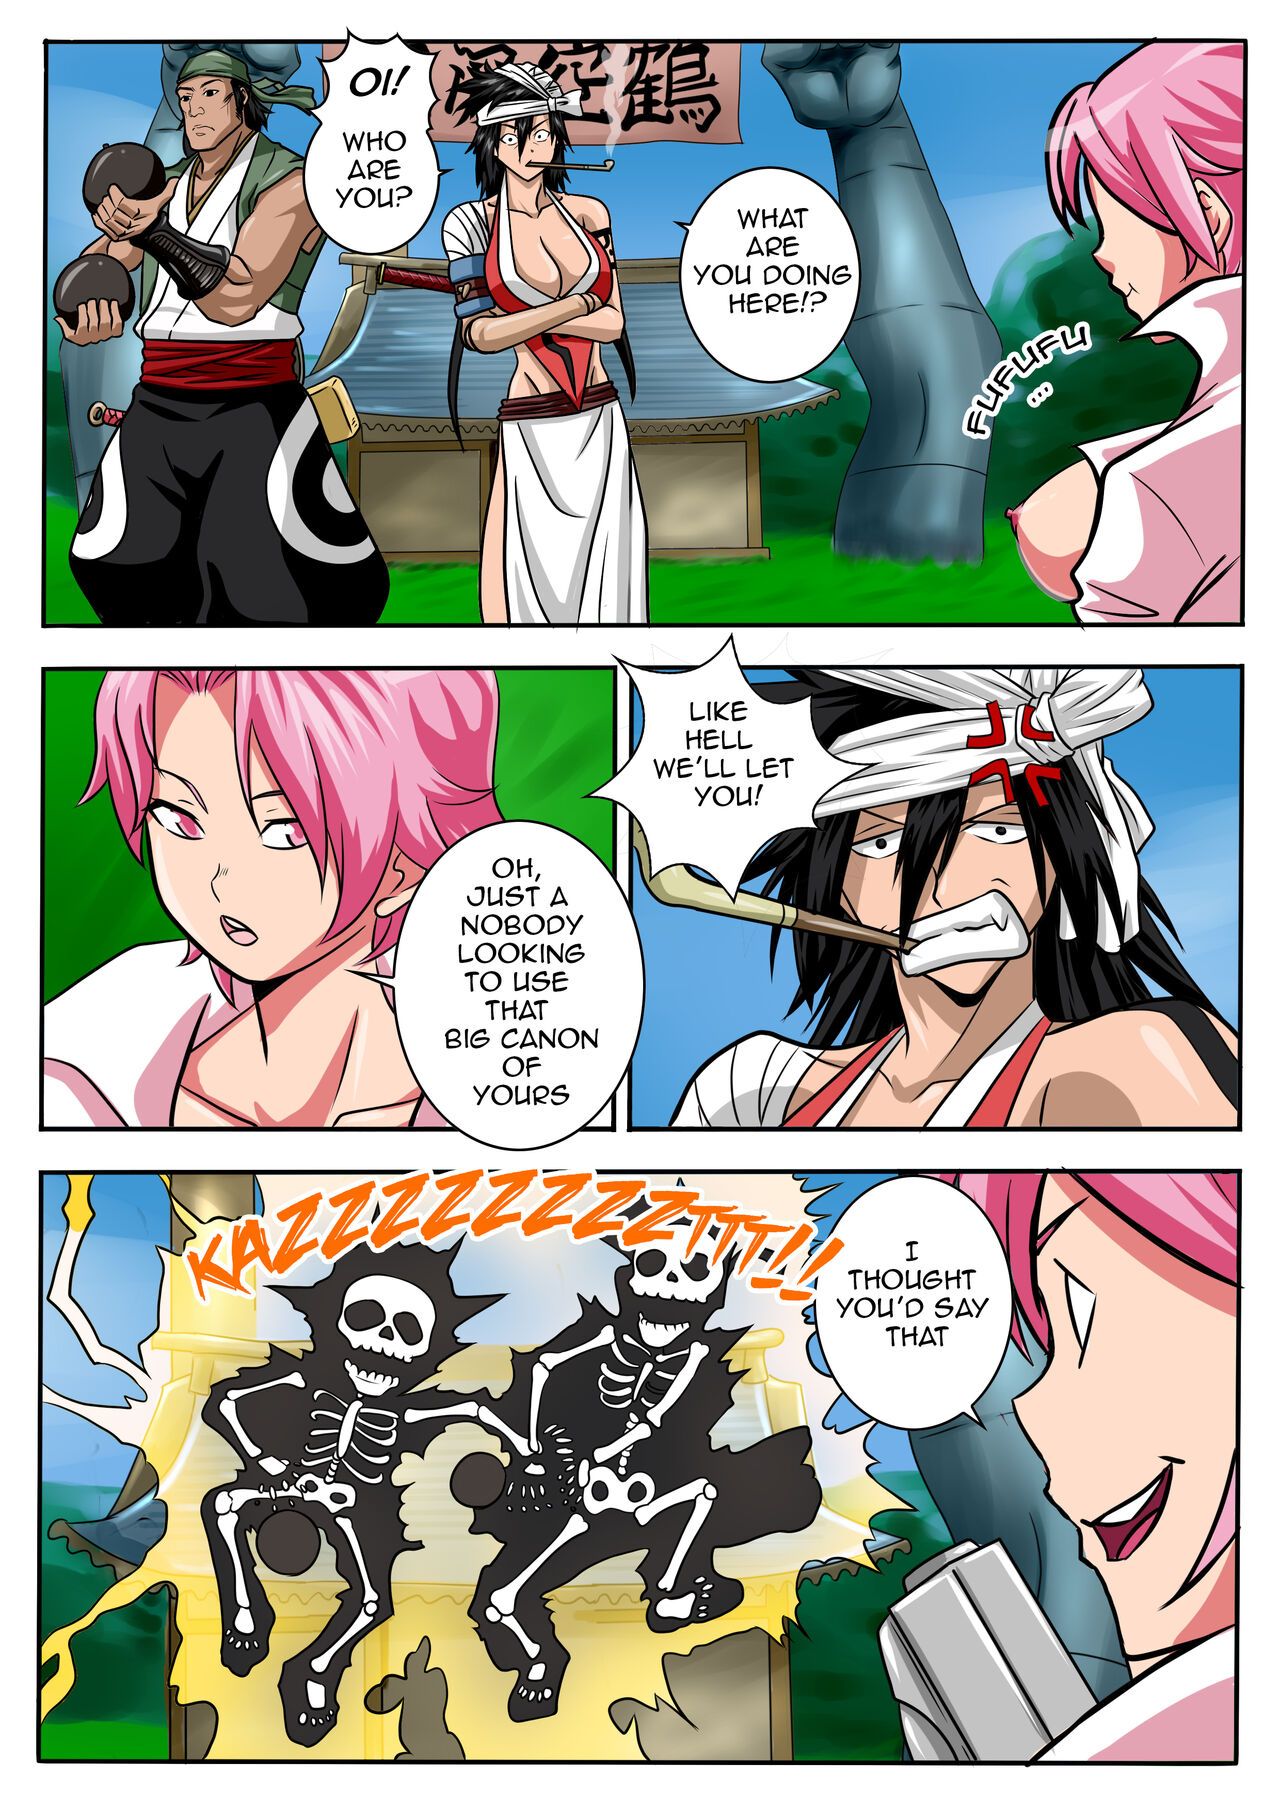 Bleach: A What If Story Part 6 Porn Comic english 02